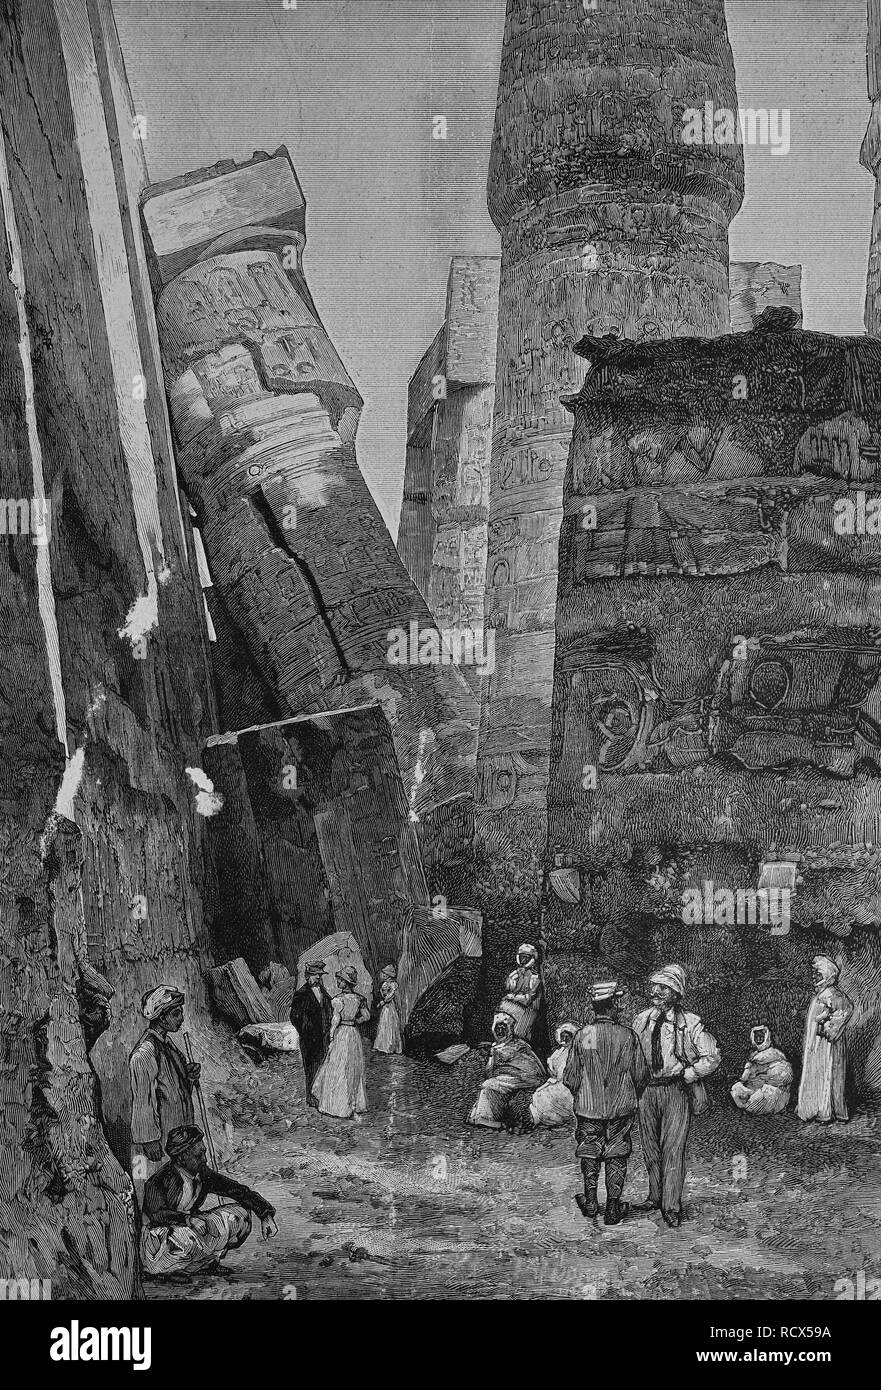 Newly fallen pillar in the Temple of Karnak, Egypt, woodcut, historical engraving, 1882 Stock Photo